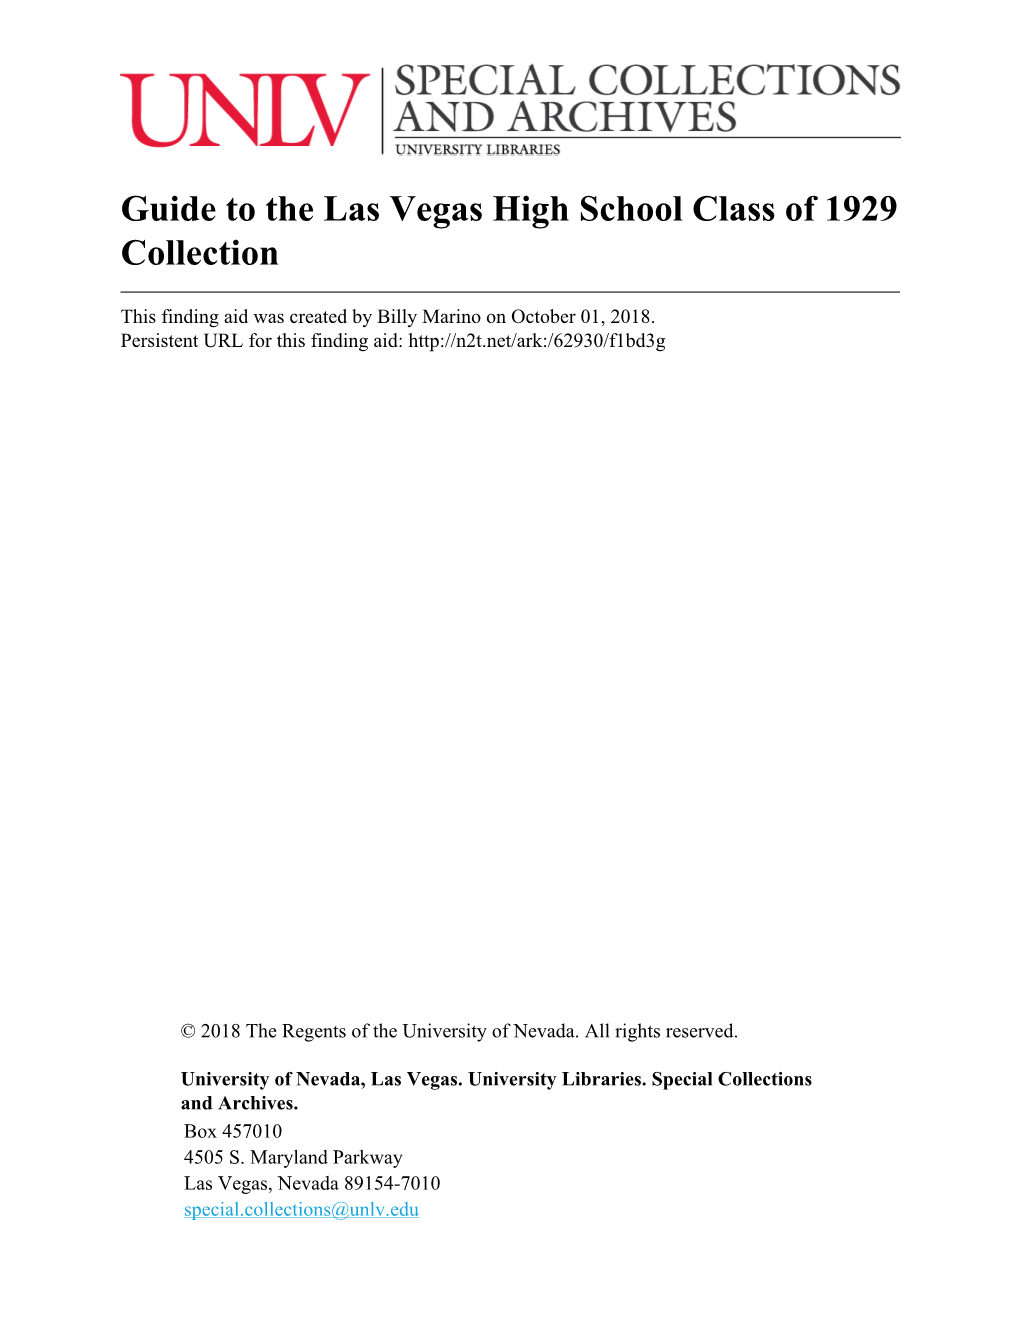 Guide to the Las Vegas High School Class of 1929 Collection